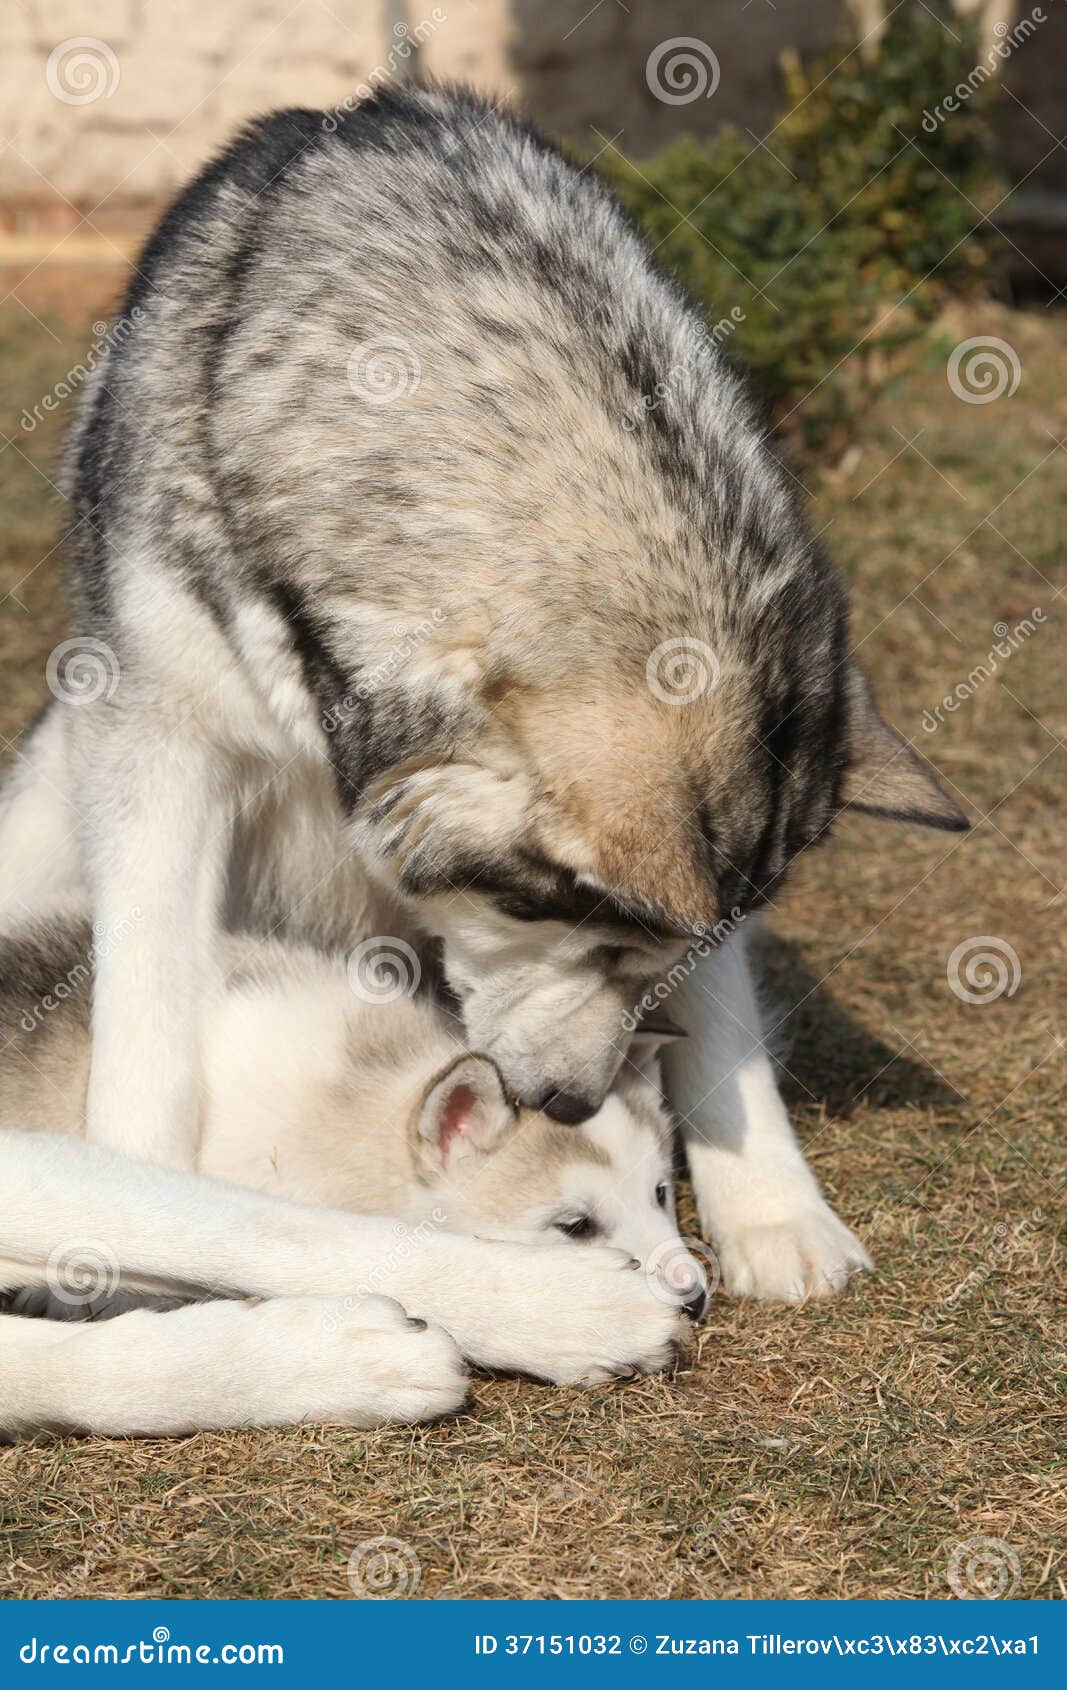 Alaskan malamute parent with puppy. Alaskan malamute parent playing with puppy on the garden